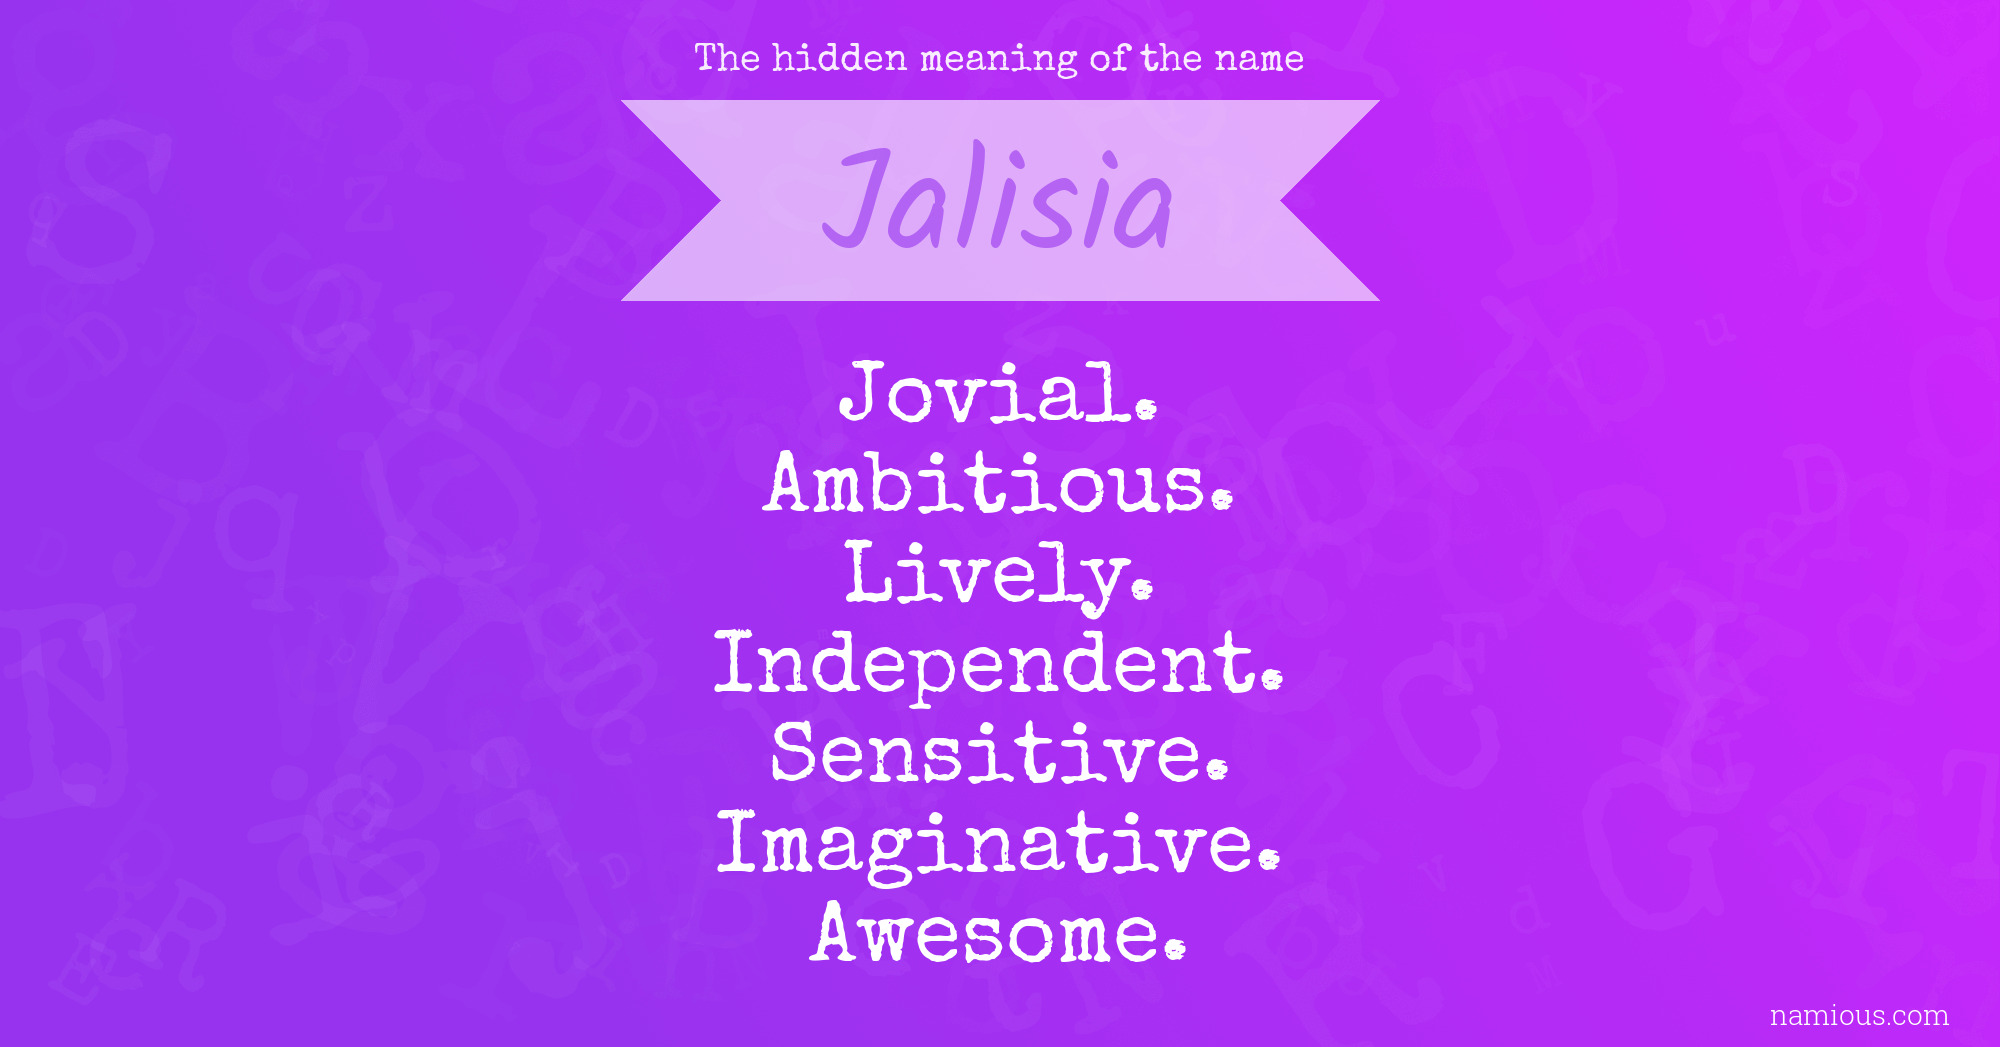 The hidden meaning of the name Jalisia